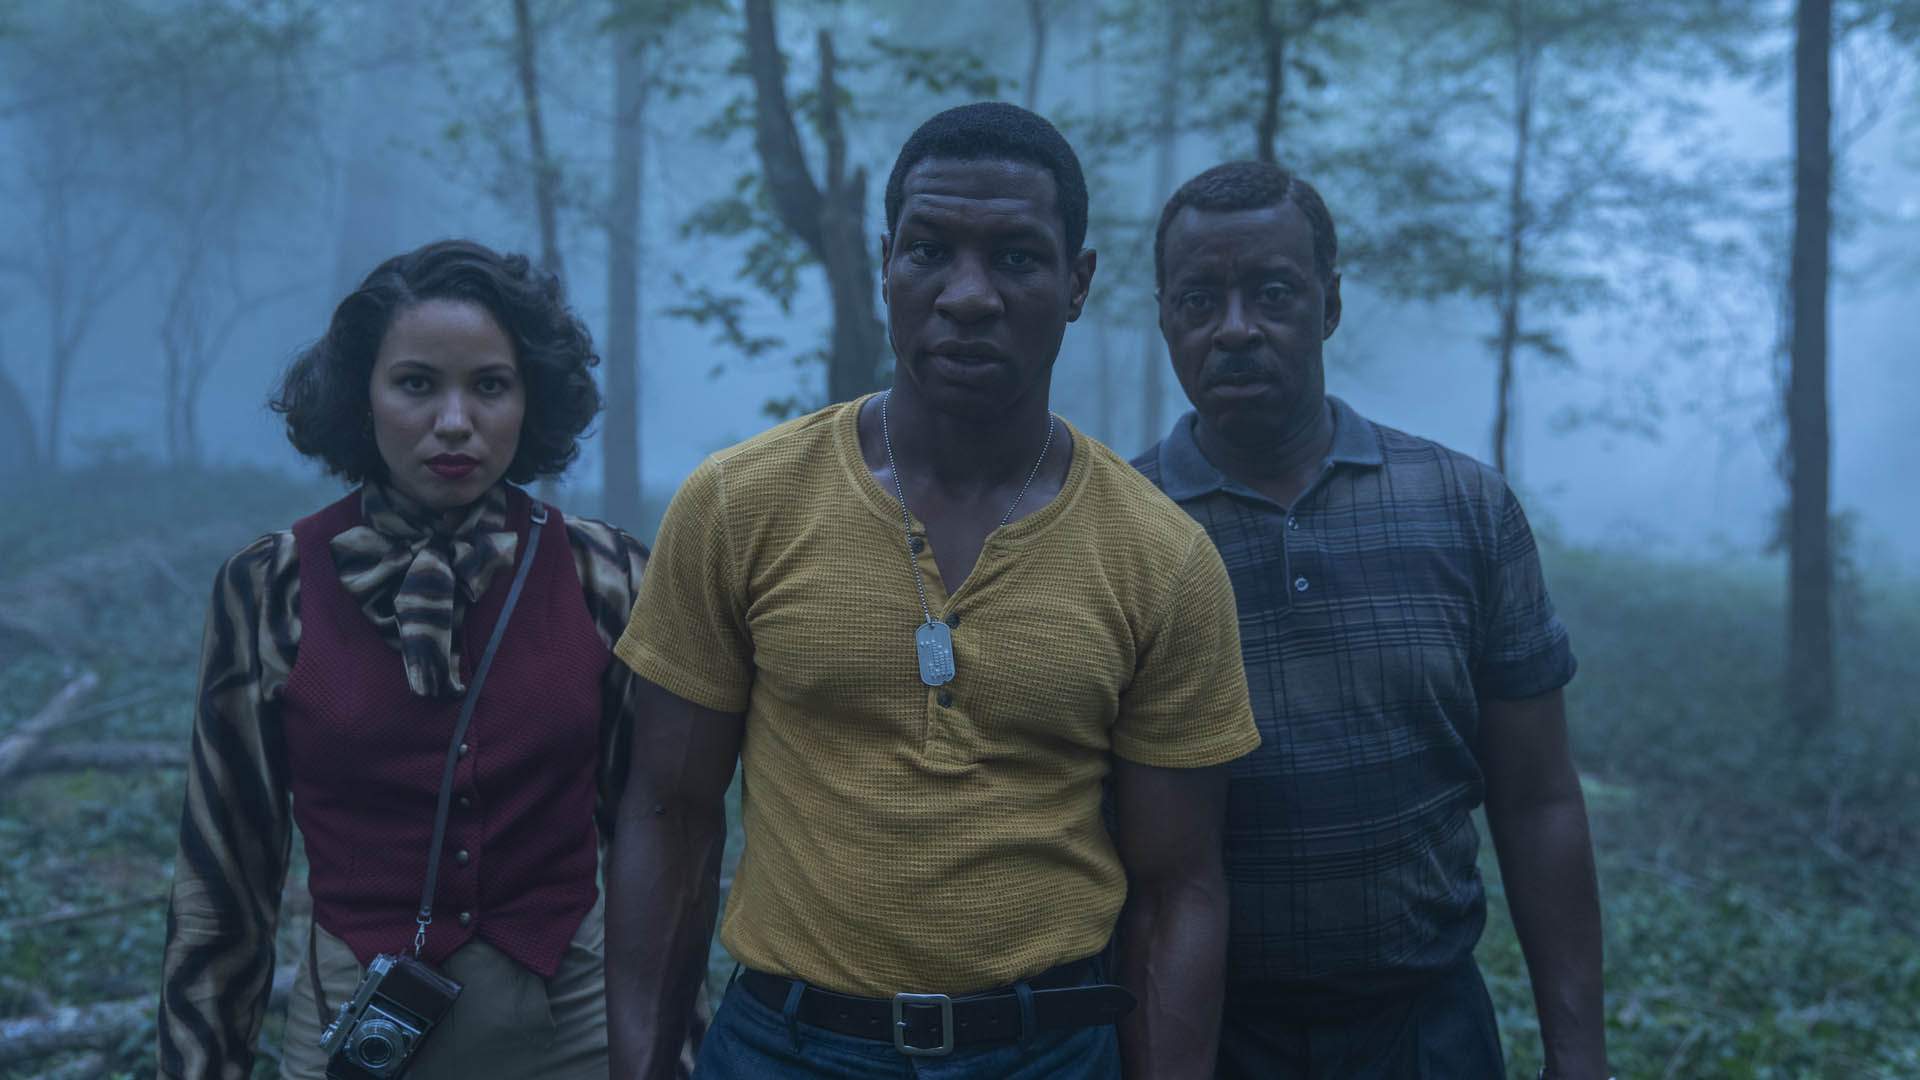 'Lovecraft Country' Is the Must-See New HBO Series Exploring US Race Relations Through Horror